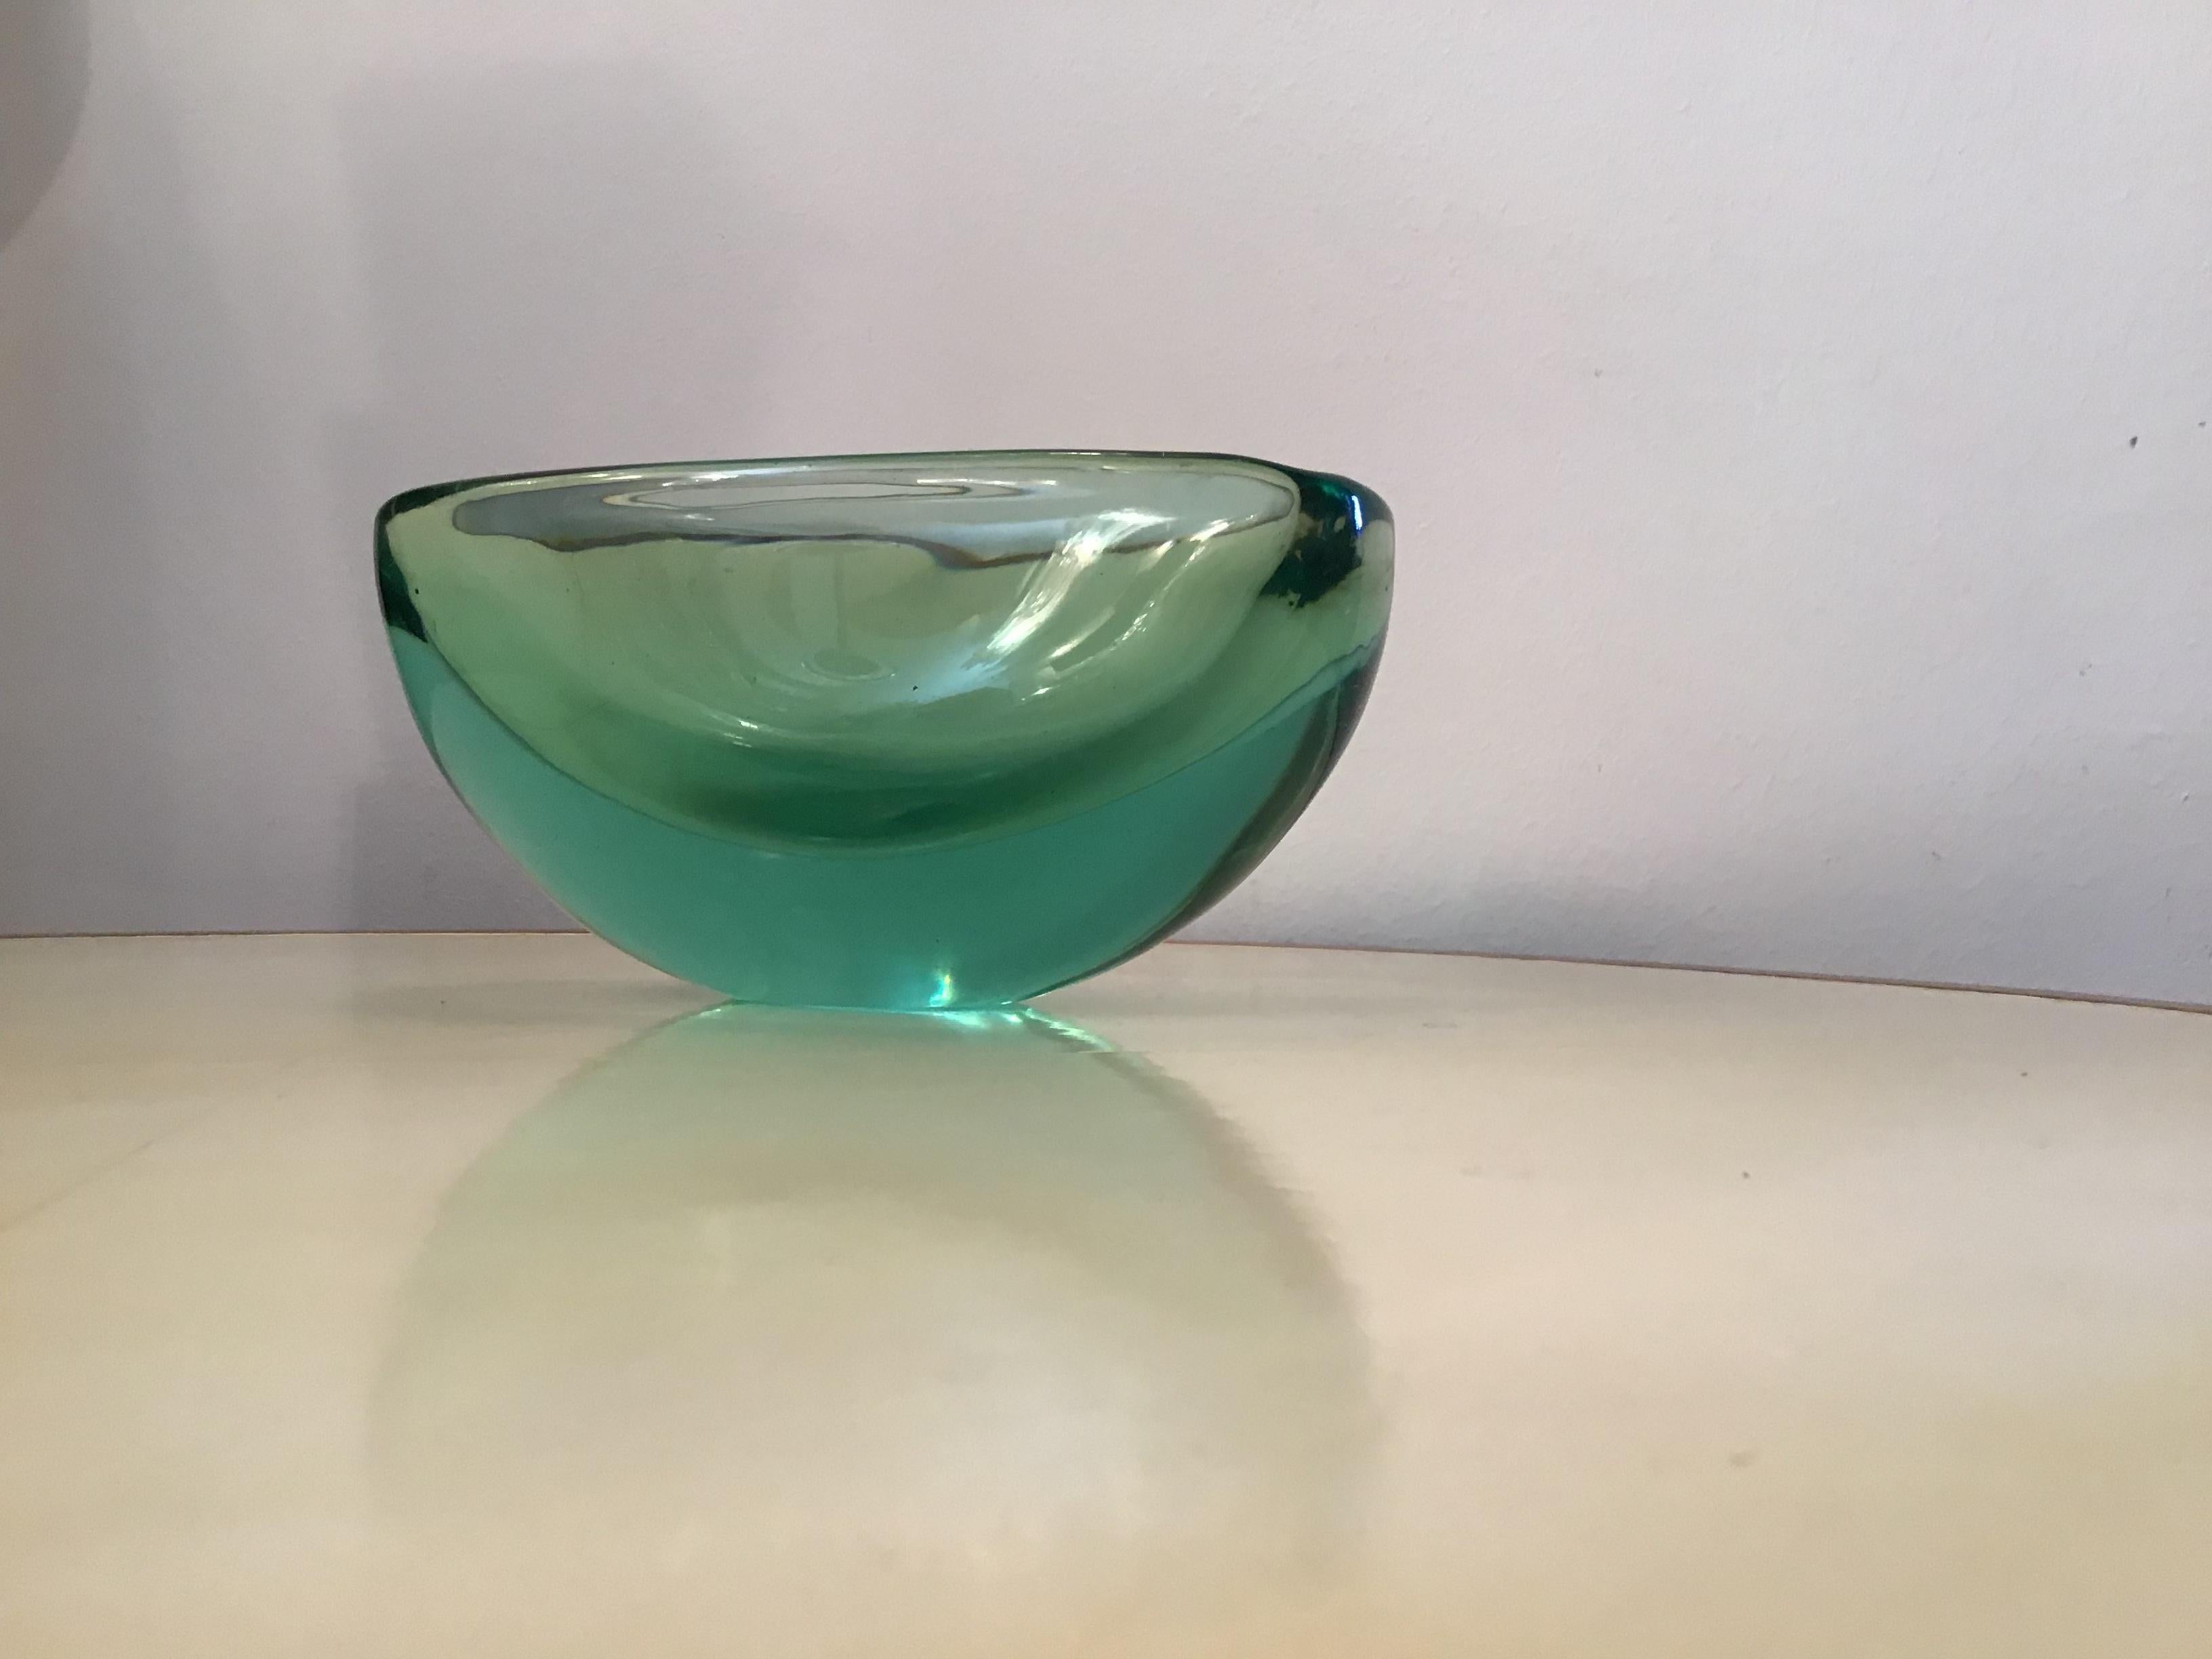 Mid-20th Century Archimede Seguso Oval Bowl, Green Submerged Glass Centrepiece, 1950 For Sale